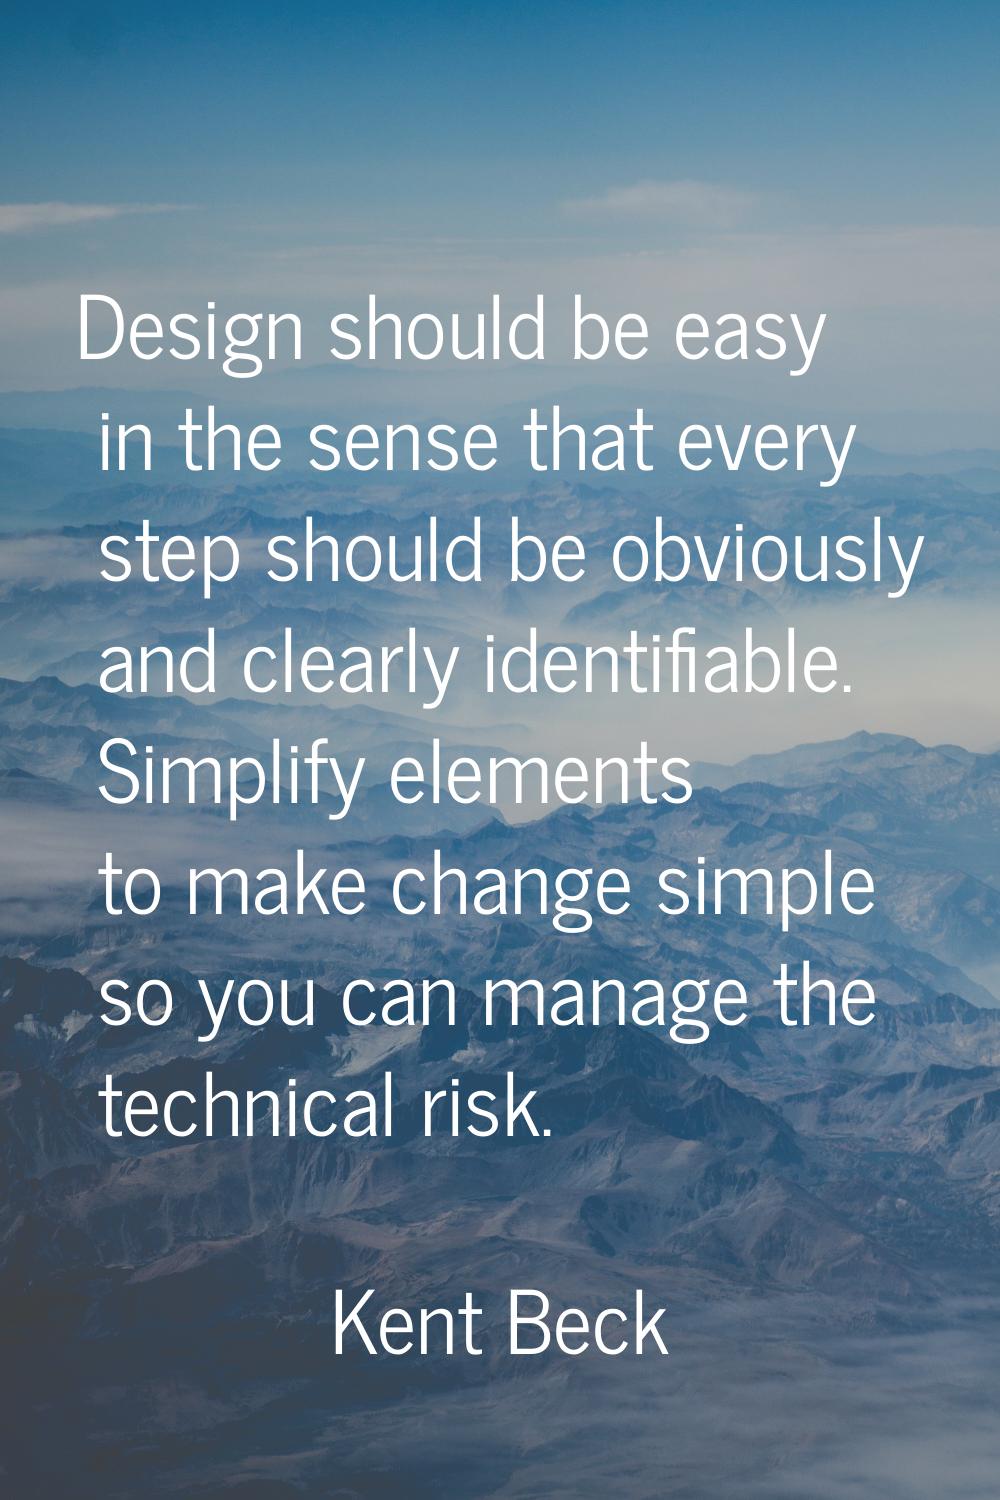 Design should be easy in the sense that every step should be obviously and clearly identifiable. Si